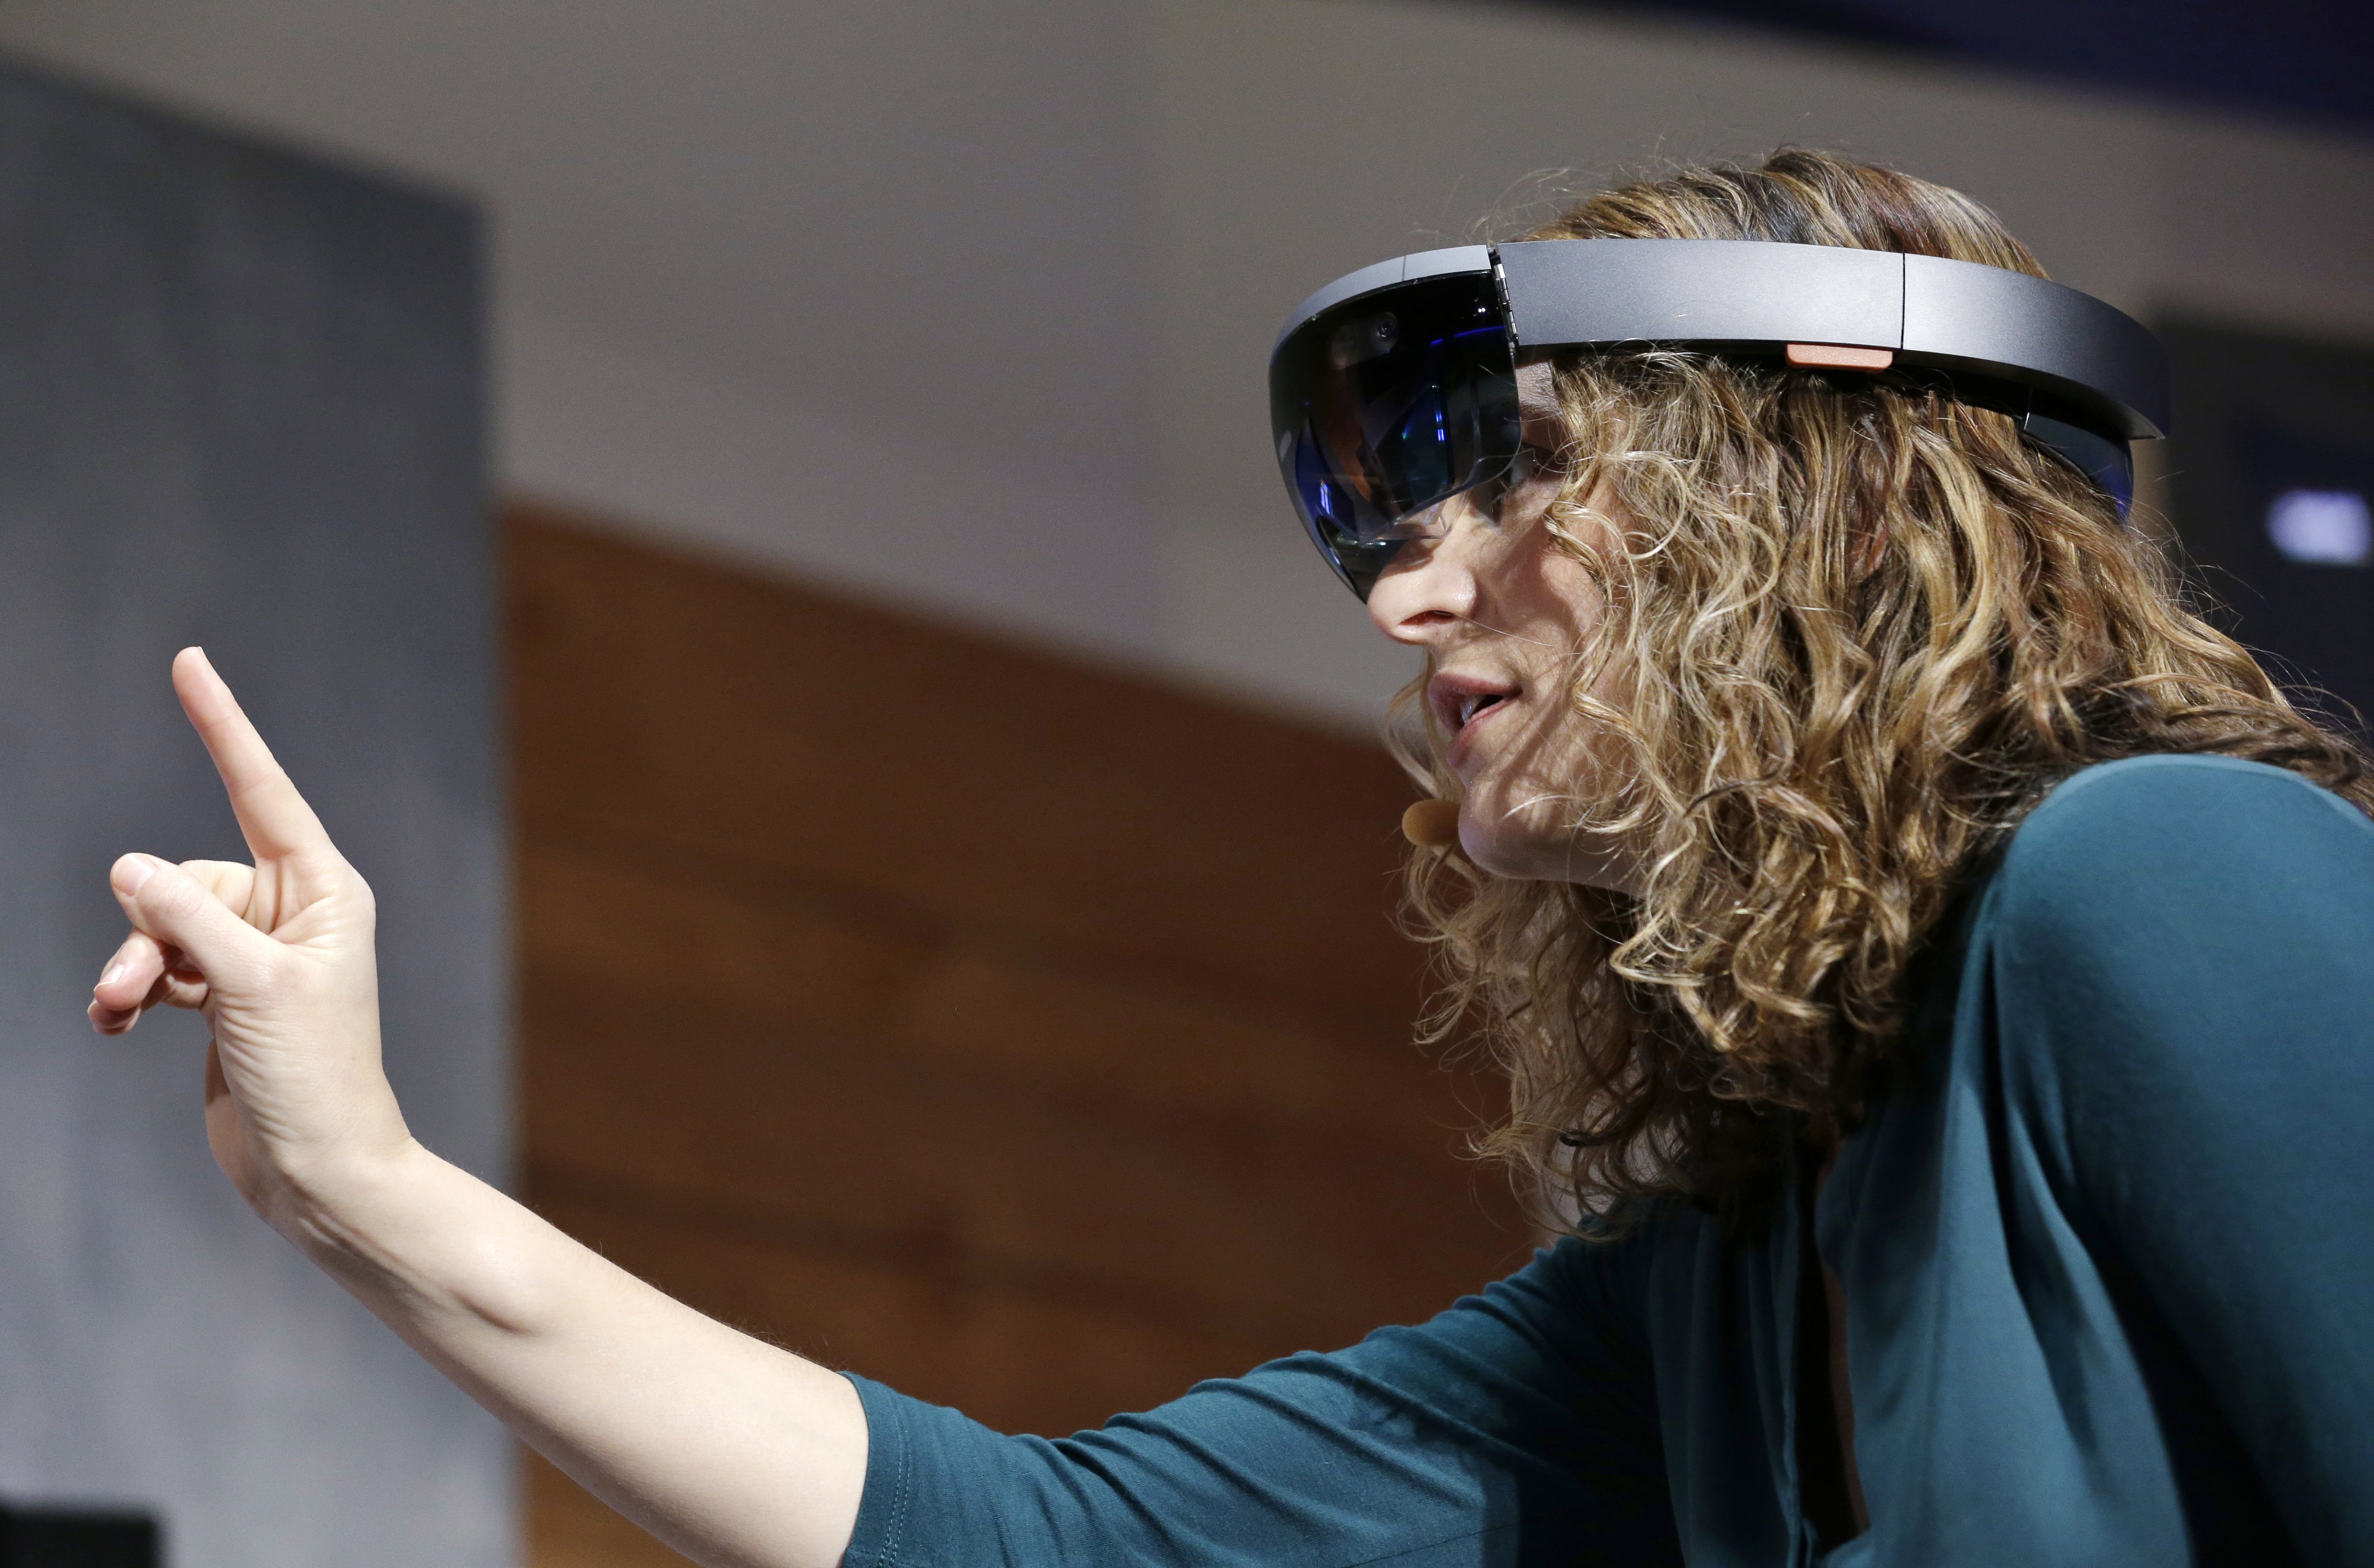 Microsoft's Lorraine Bardeen demonstrates HoloLens headset during an event at the company's headquarters in Redmond, Wash. on Jan. 21, 2015.